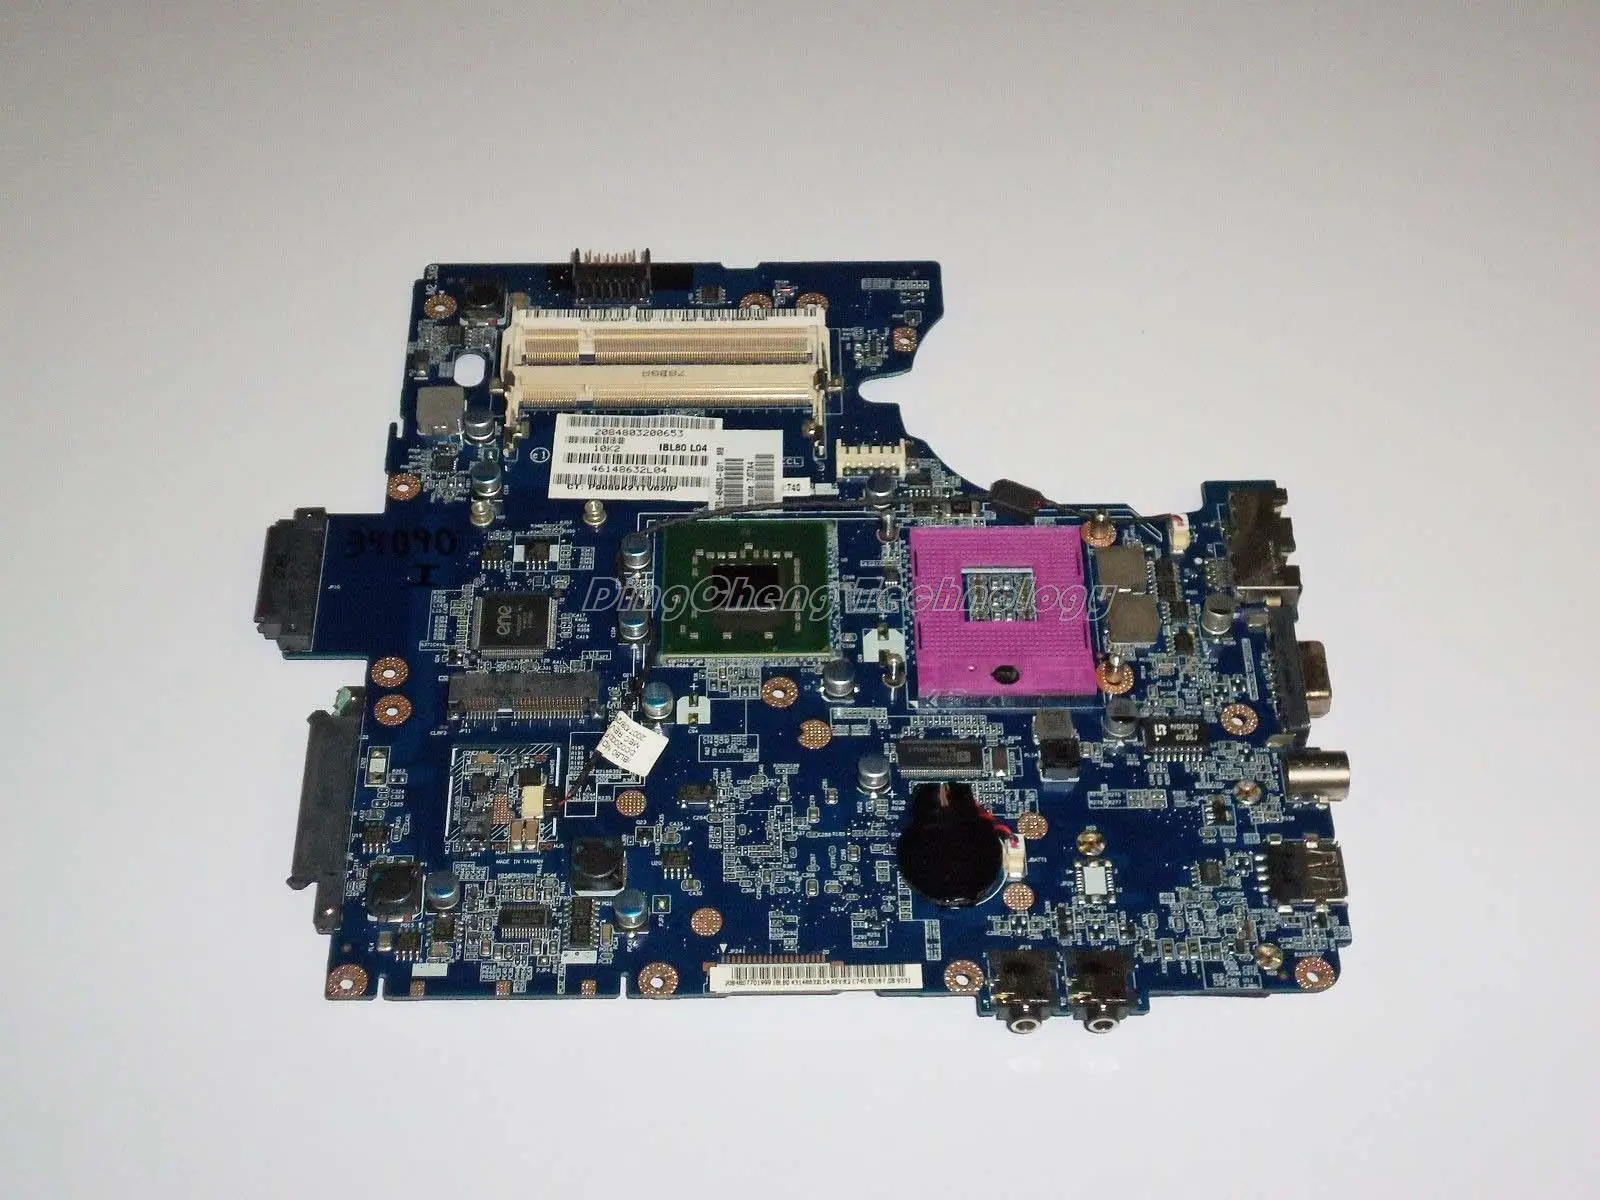 Original laptop Motherboard For hp C700 454883-001 for intel cpu with integrated graphics card tested fully